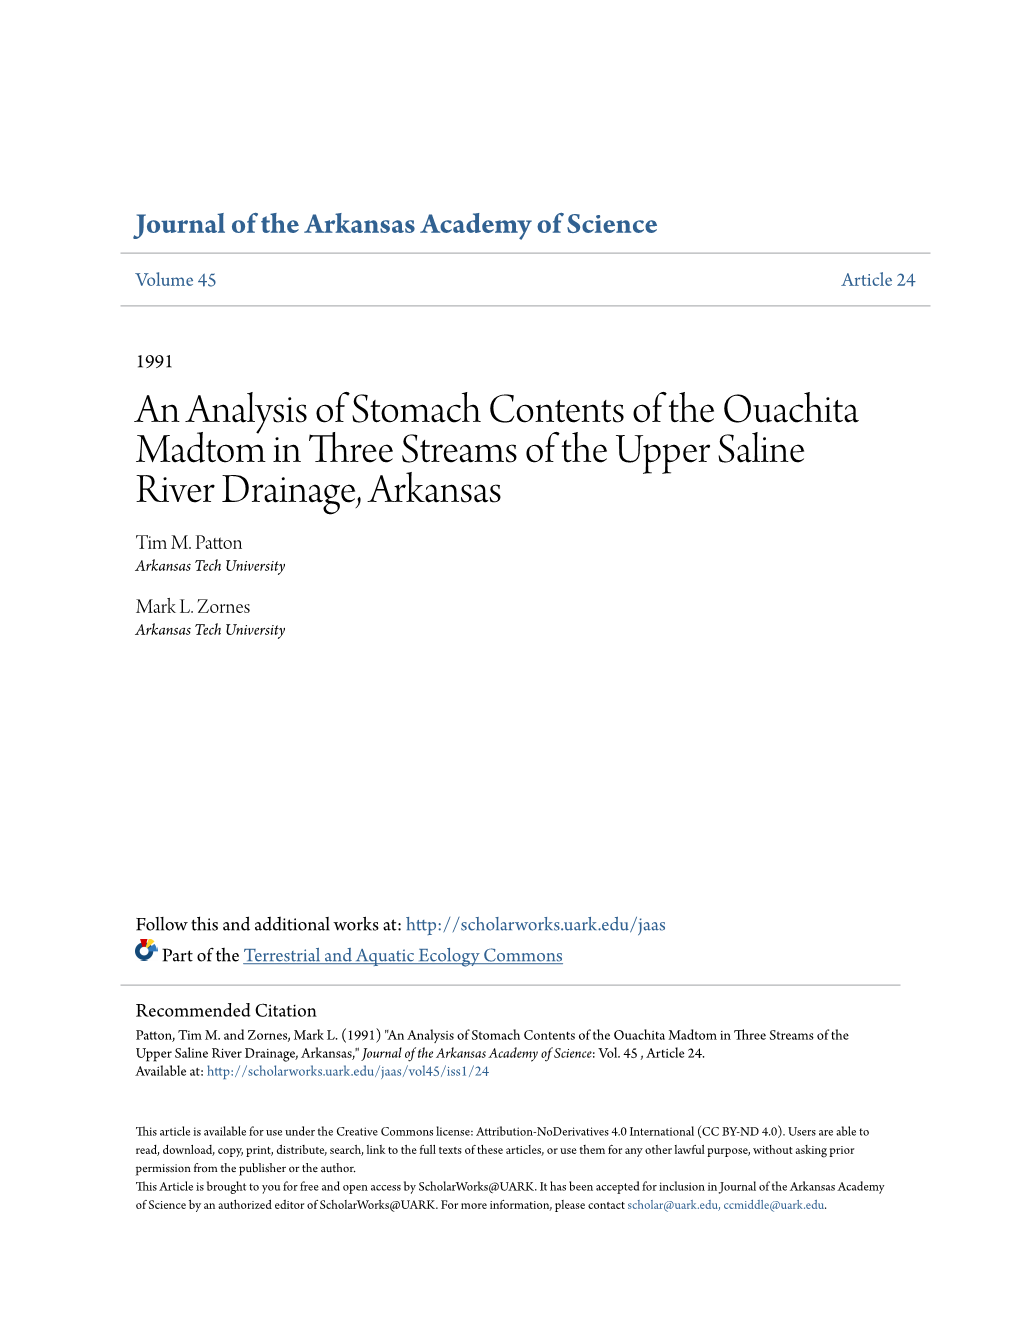 An Analysis of Stomach Contents of the Ouachita Madtom in Three Streams of the Upper Saline River Drainage, Arkansas Tim M